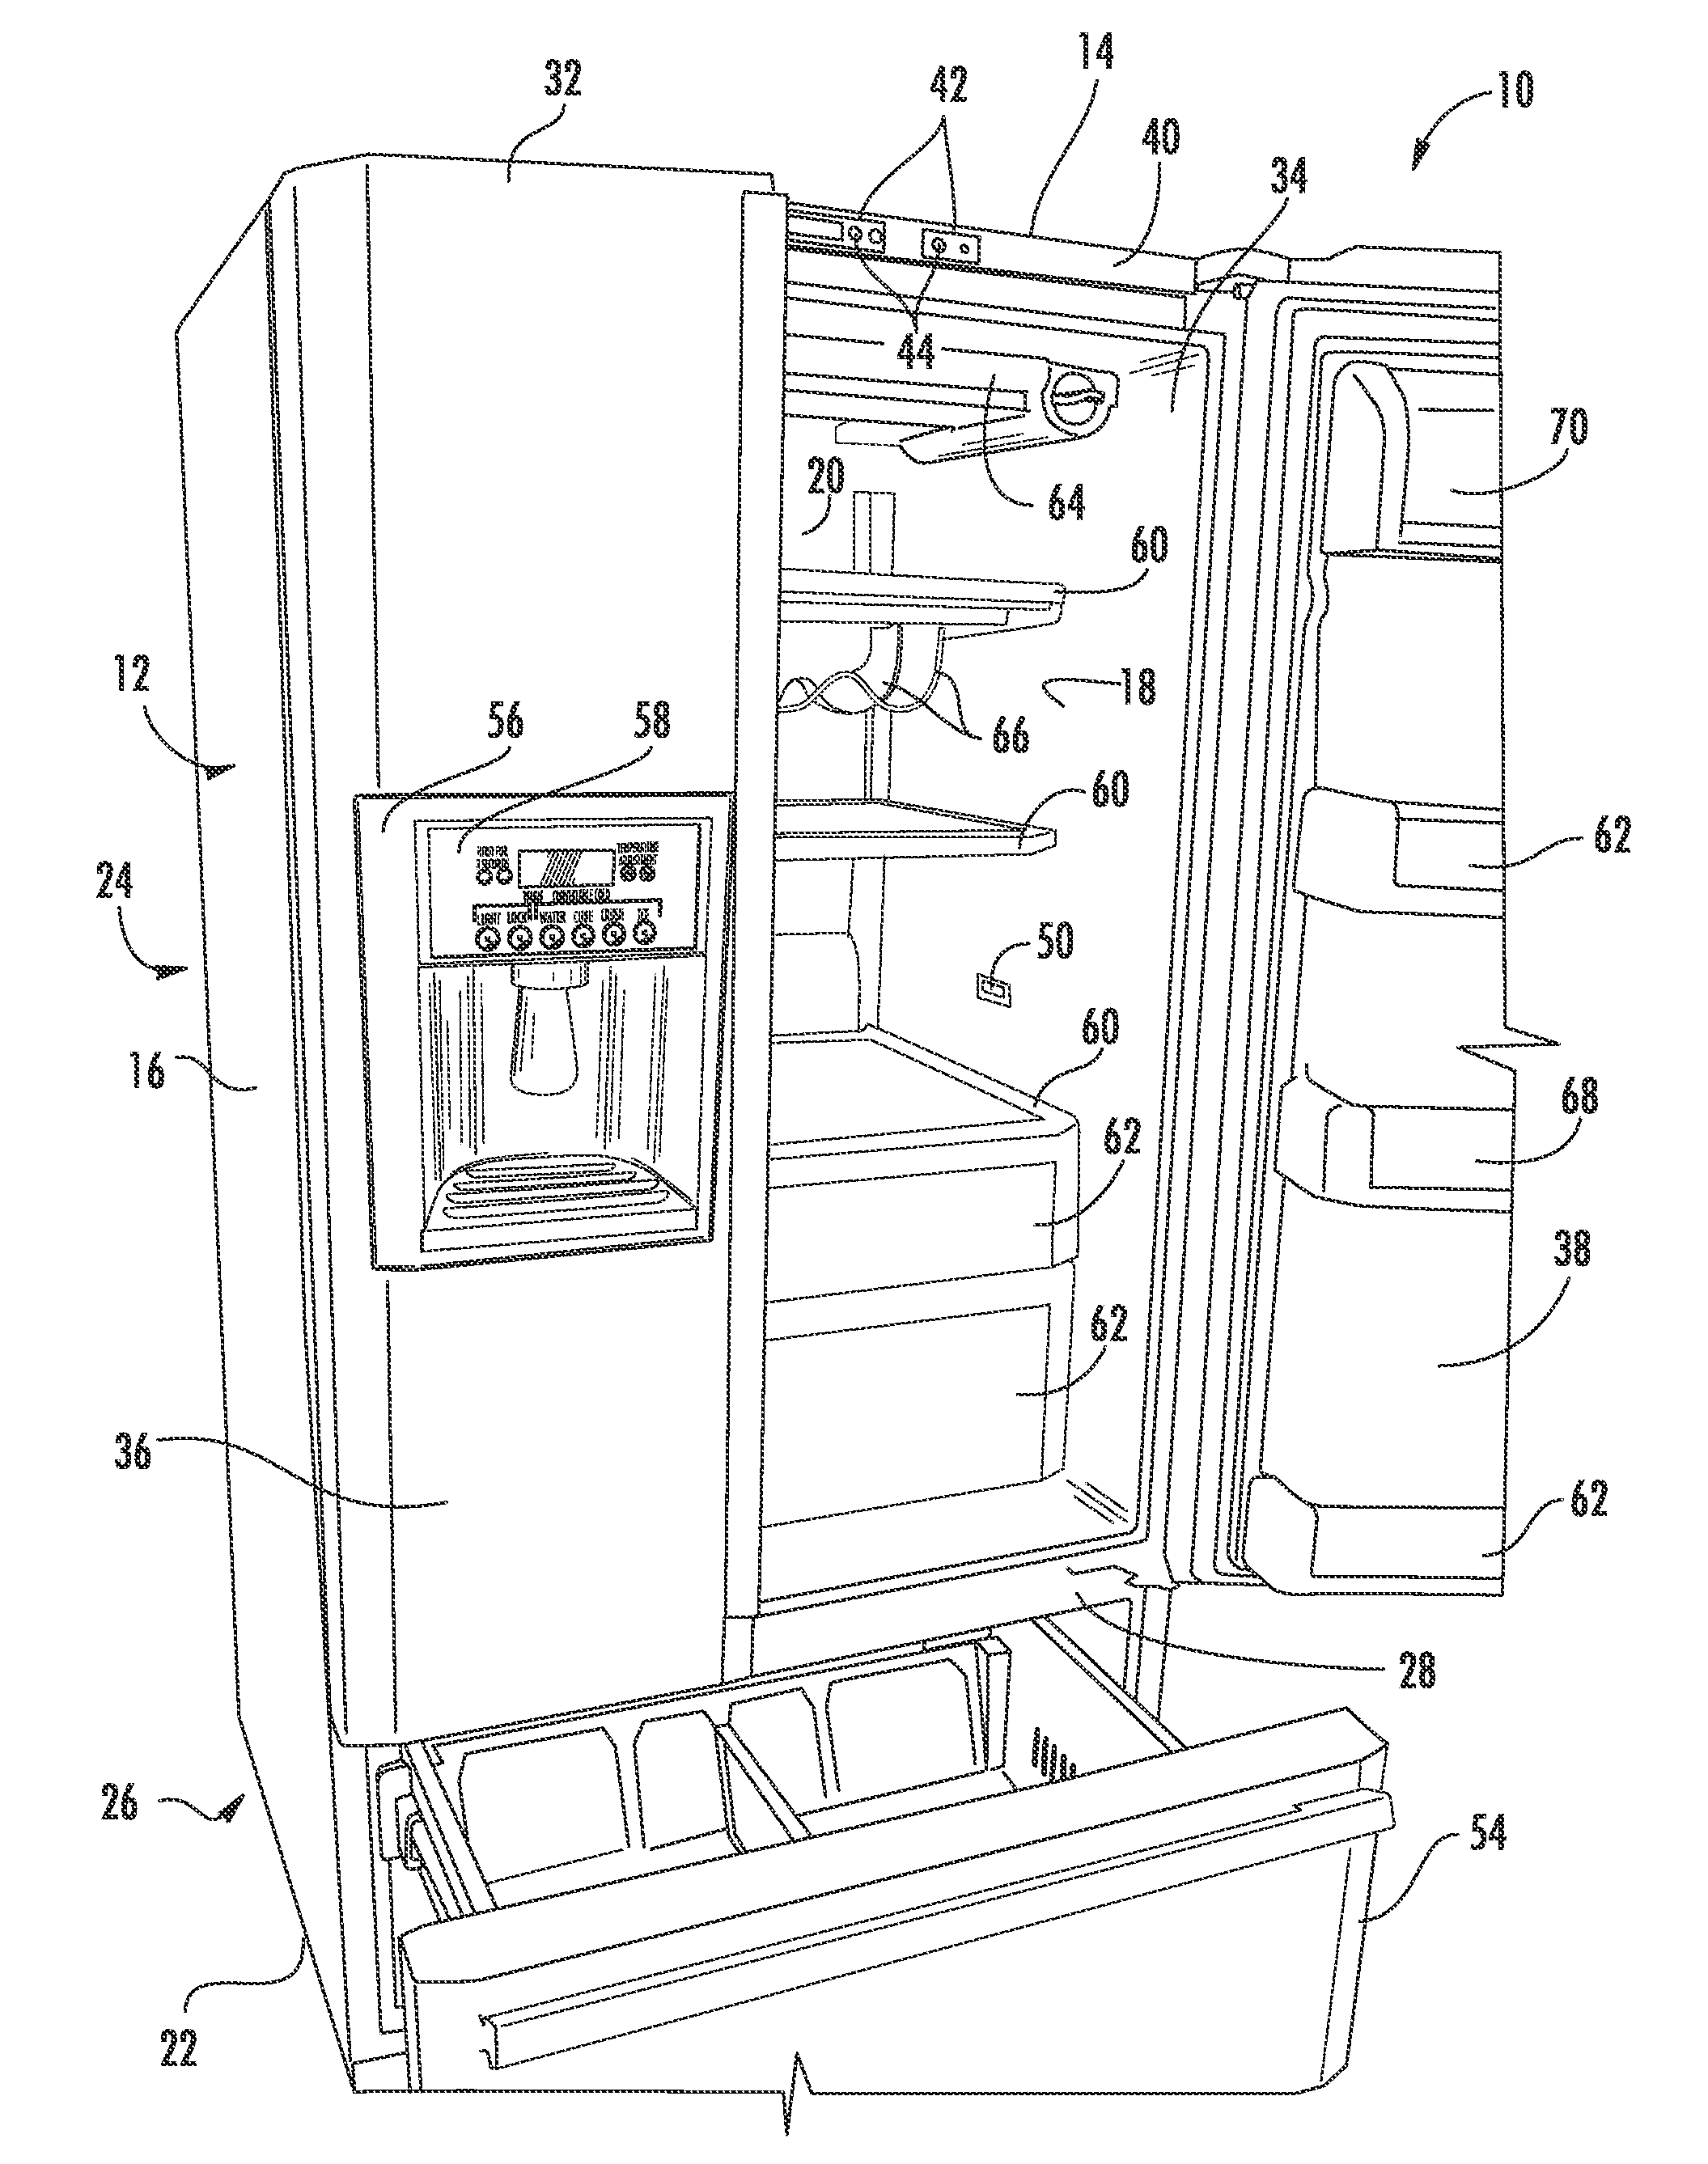 Refrigerator having compartment capable of converting between refrigeration and freezing temperatures